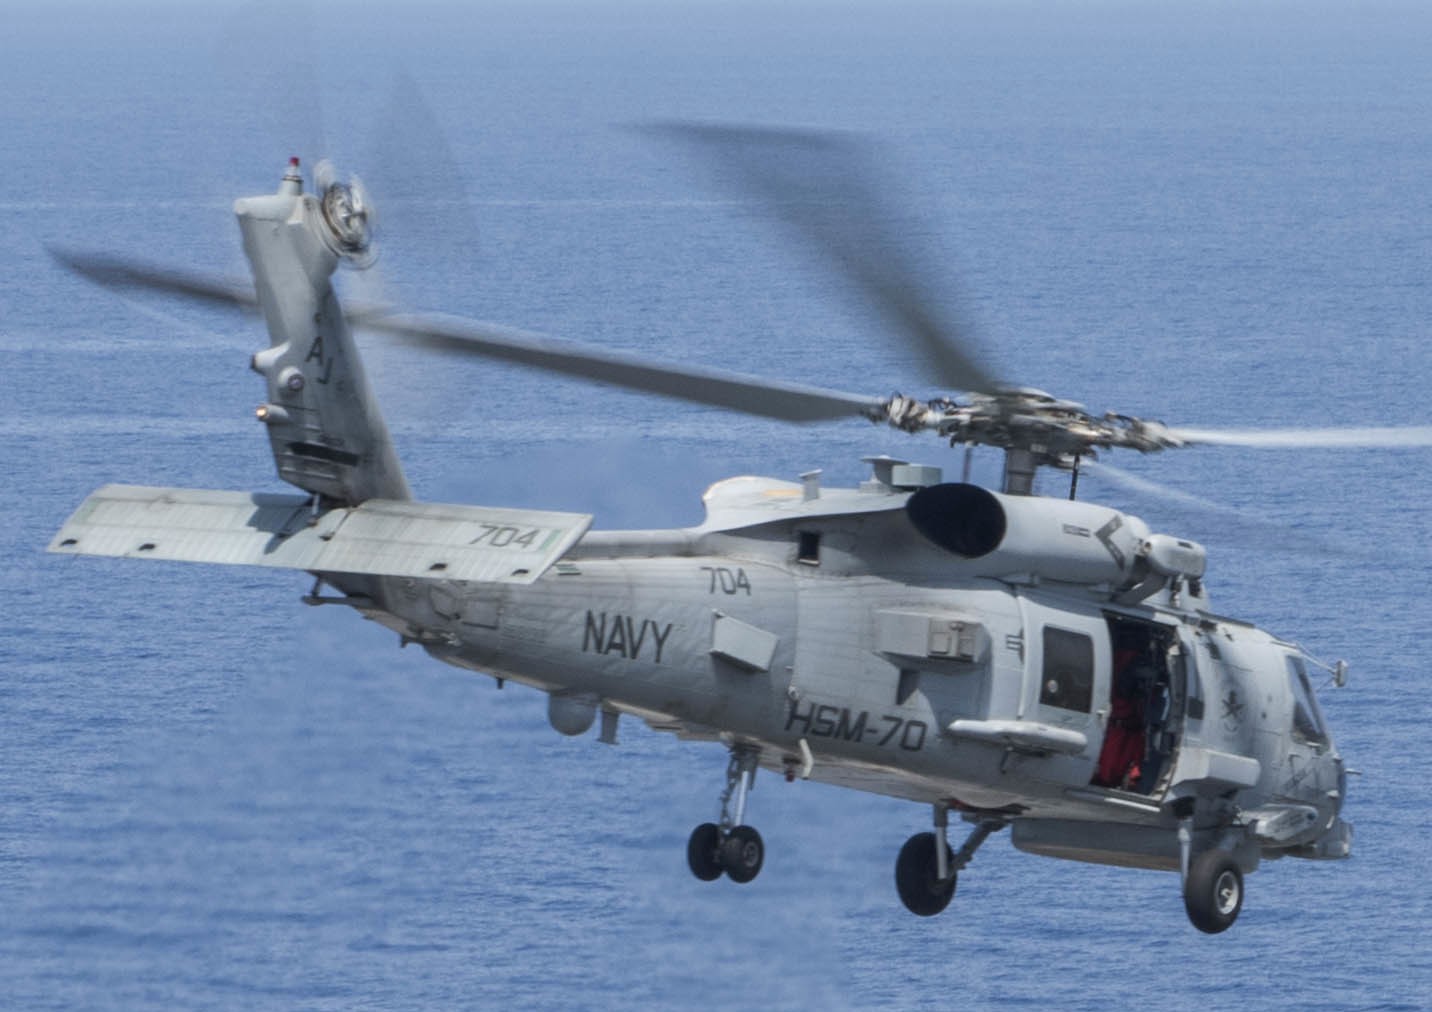 hsm-70 spartans helicopter maritime strike squadron mh-60r seahawk 2017 67